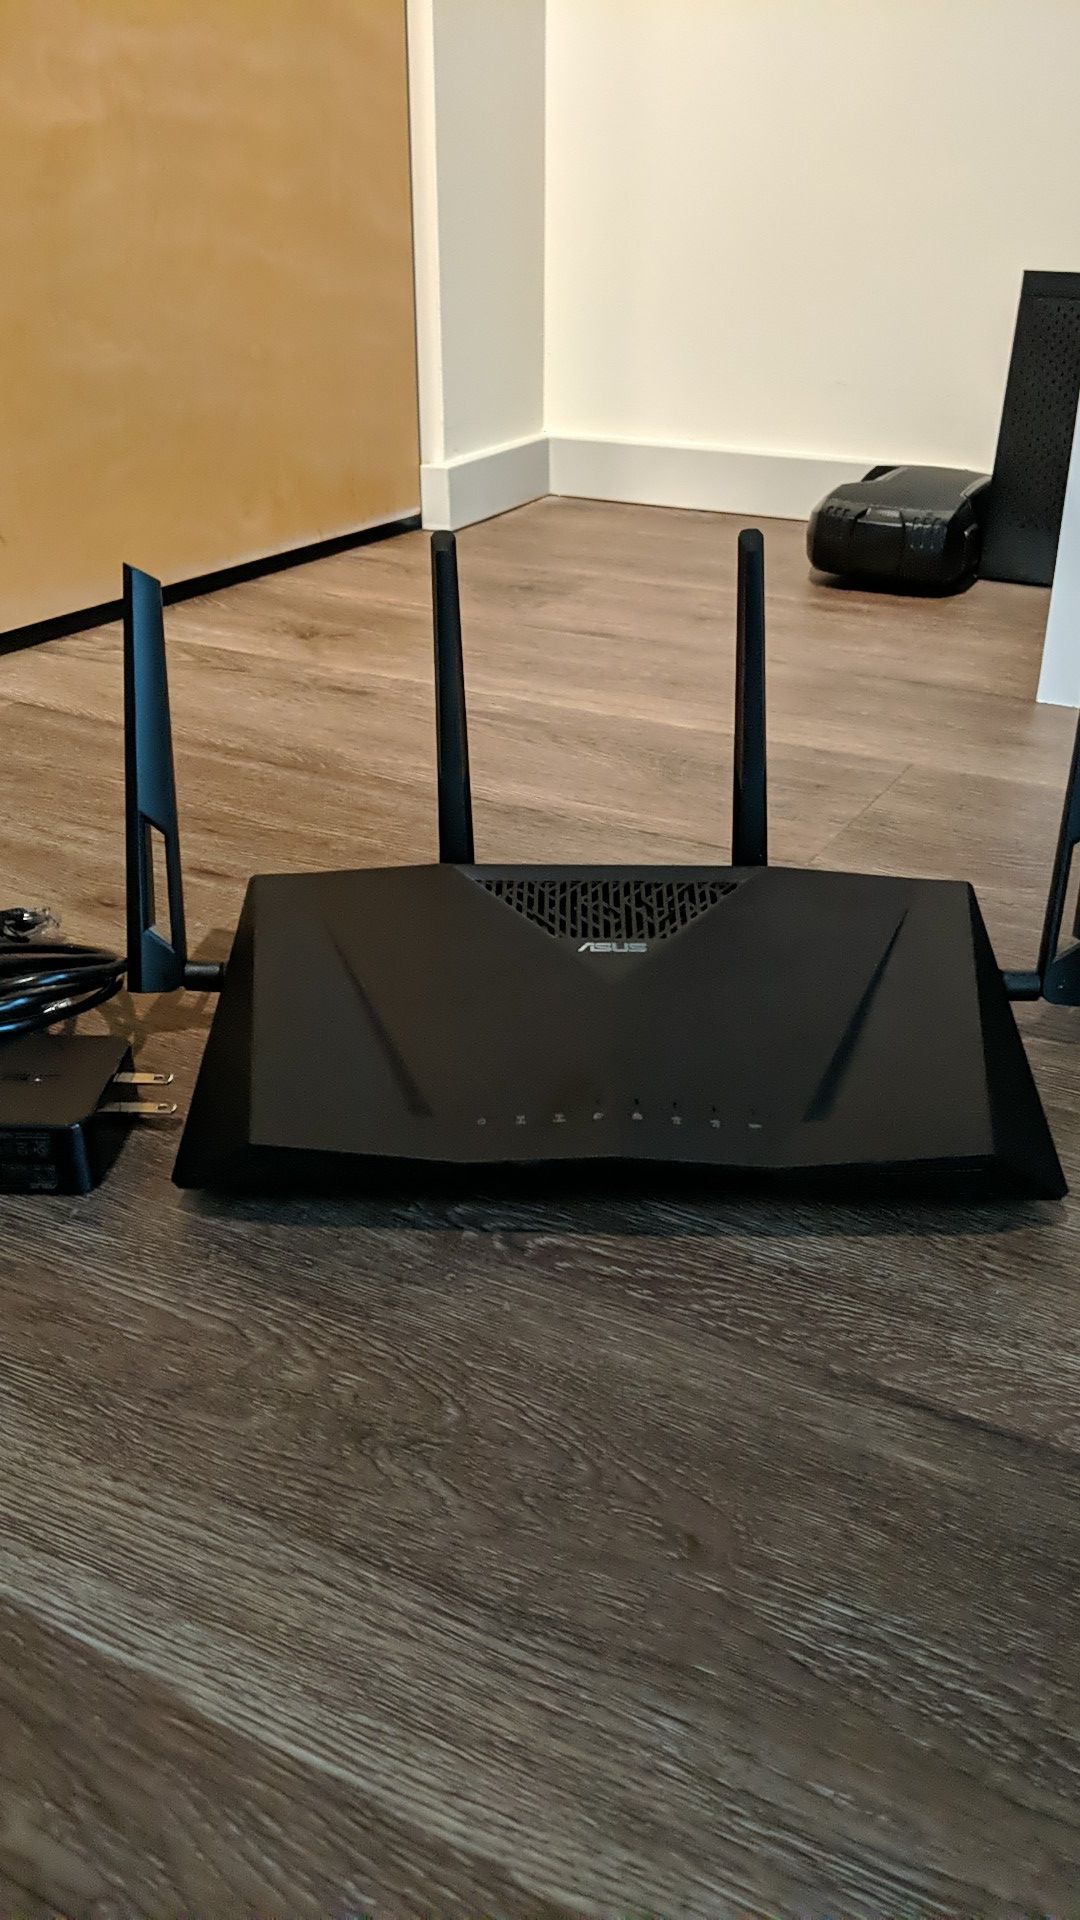 ASUS - AC3100 Dual-Band Wi-Fi Router